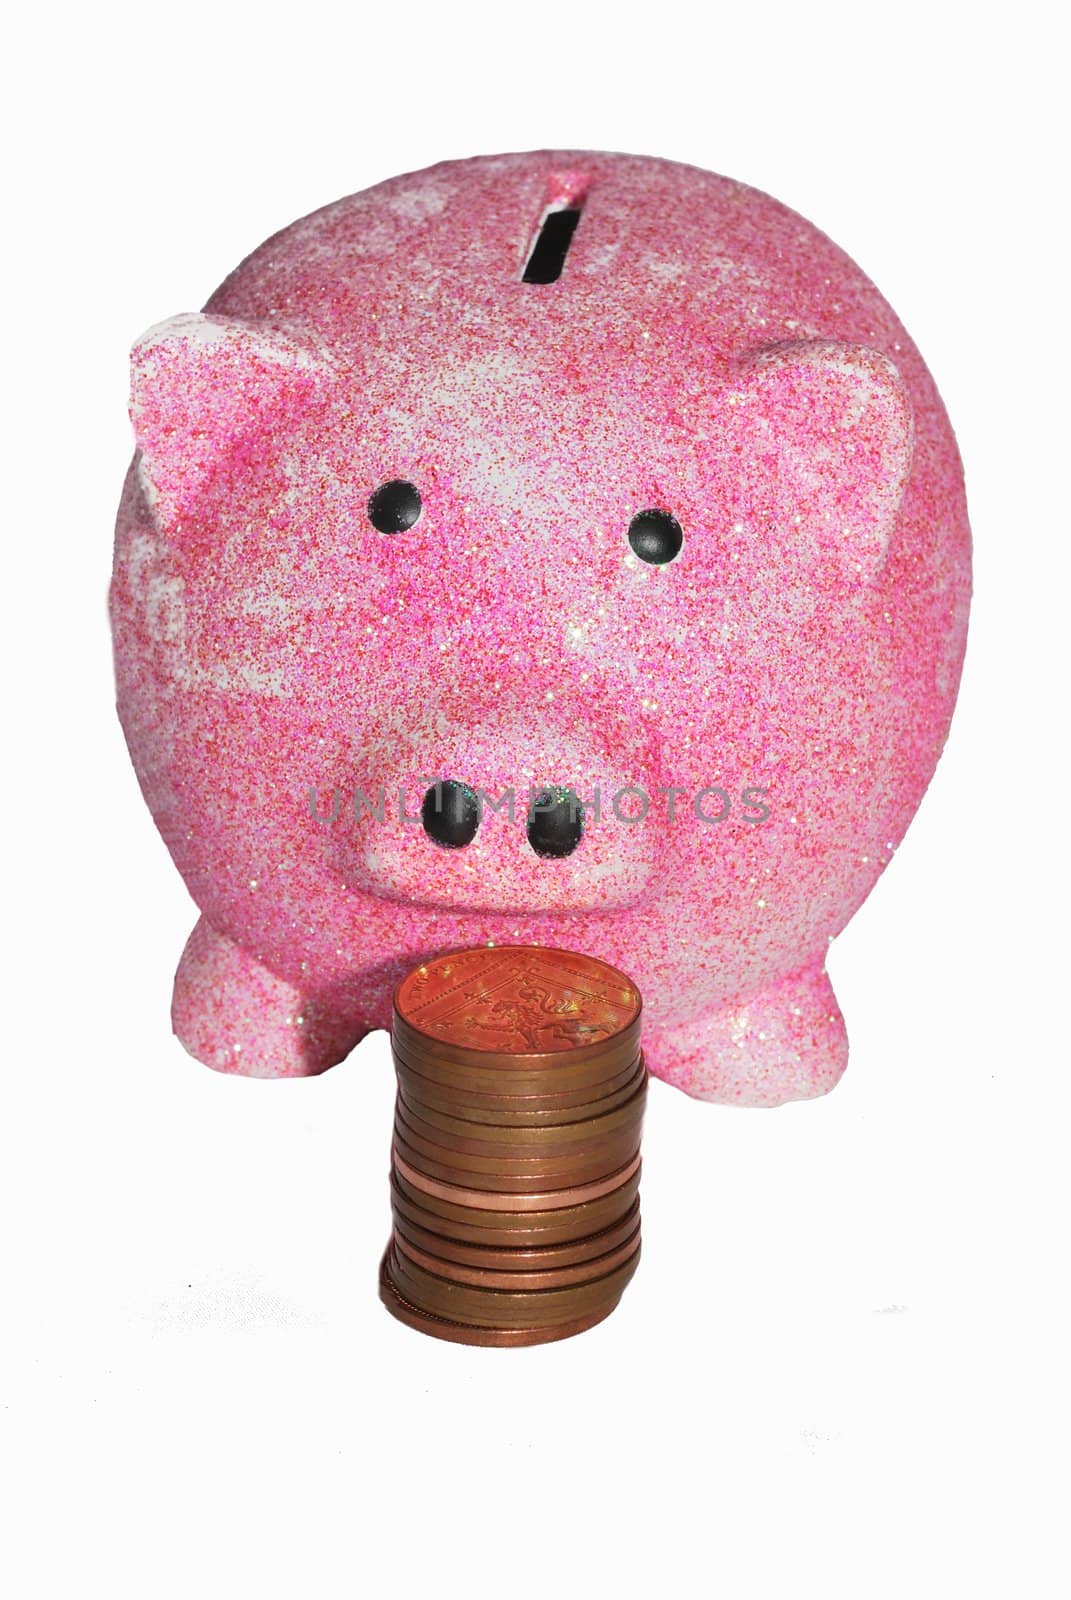 Piggy bank with coins by pauws99